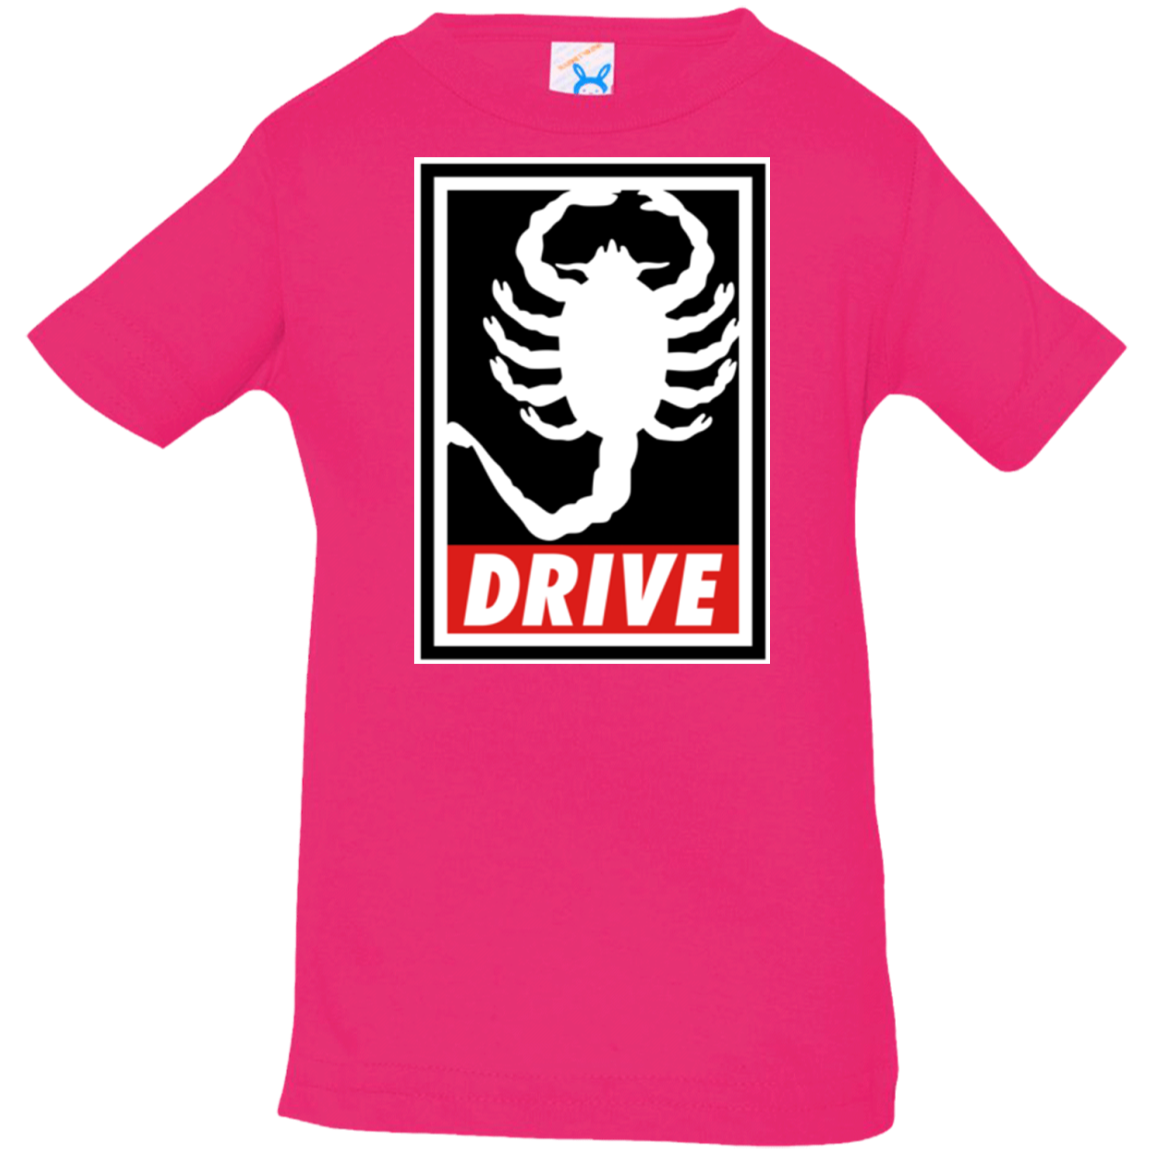 Obey and drive Infant PremiumT-Shirt